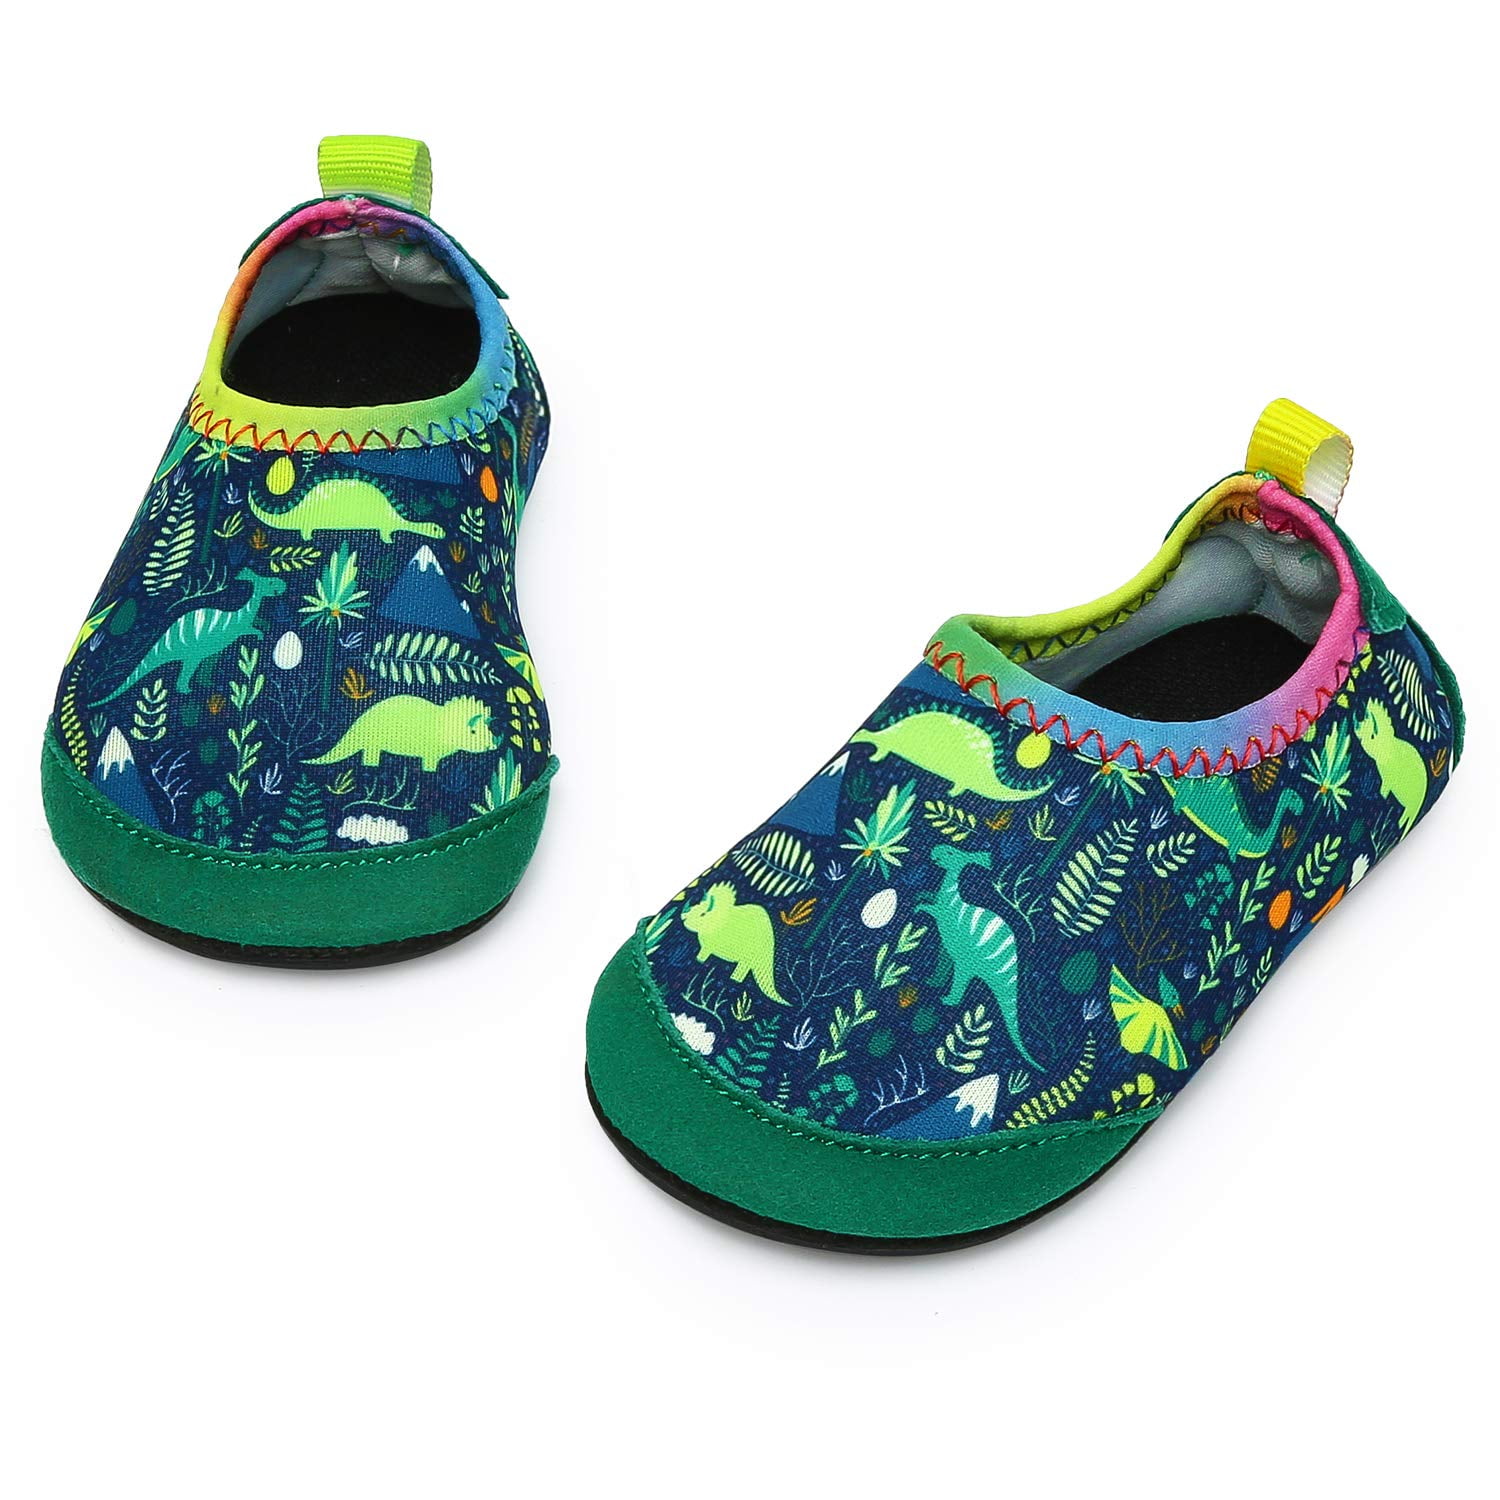 Apolter Baby Water Shoes Barefoot Swim Shoes Quick Dry Non-Slip Aqua Socks for Toddler Boys Girls